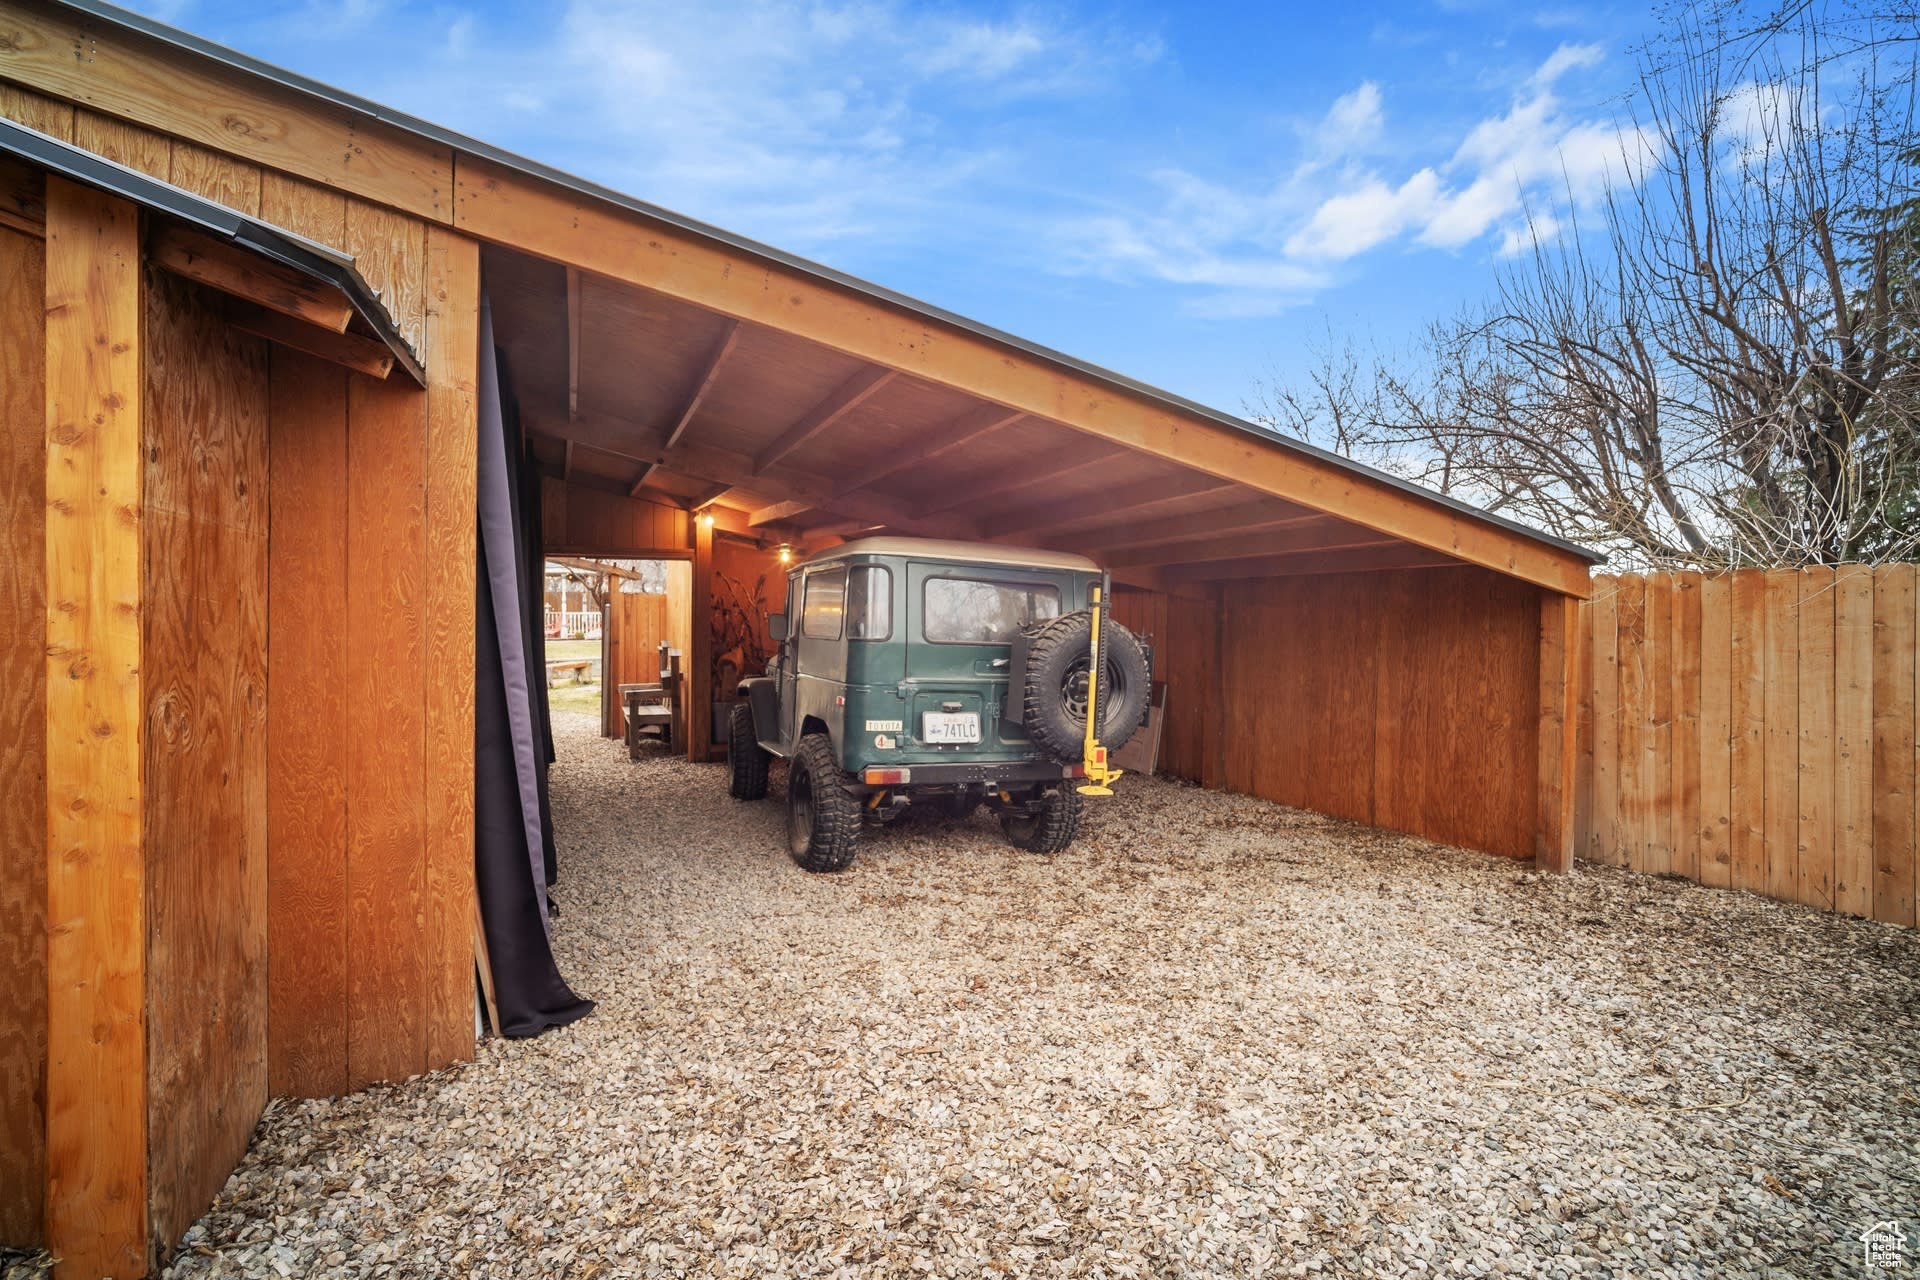 Exterior space with a carport